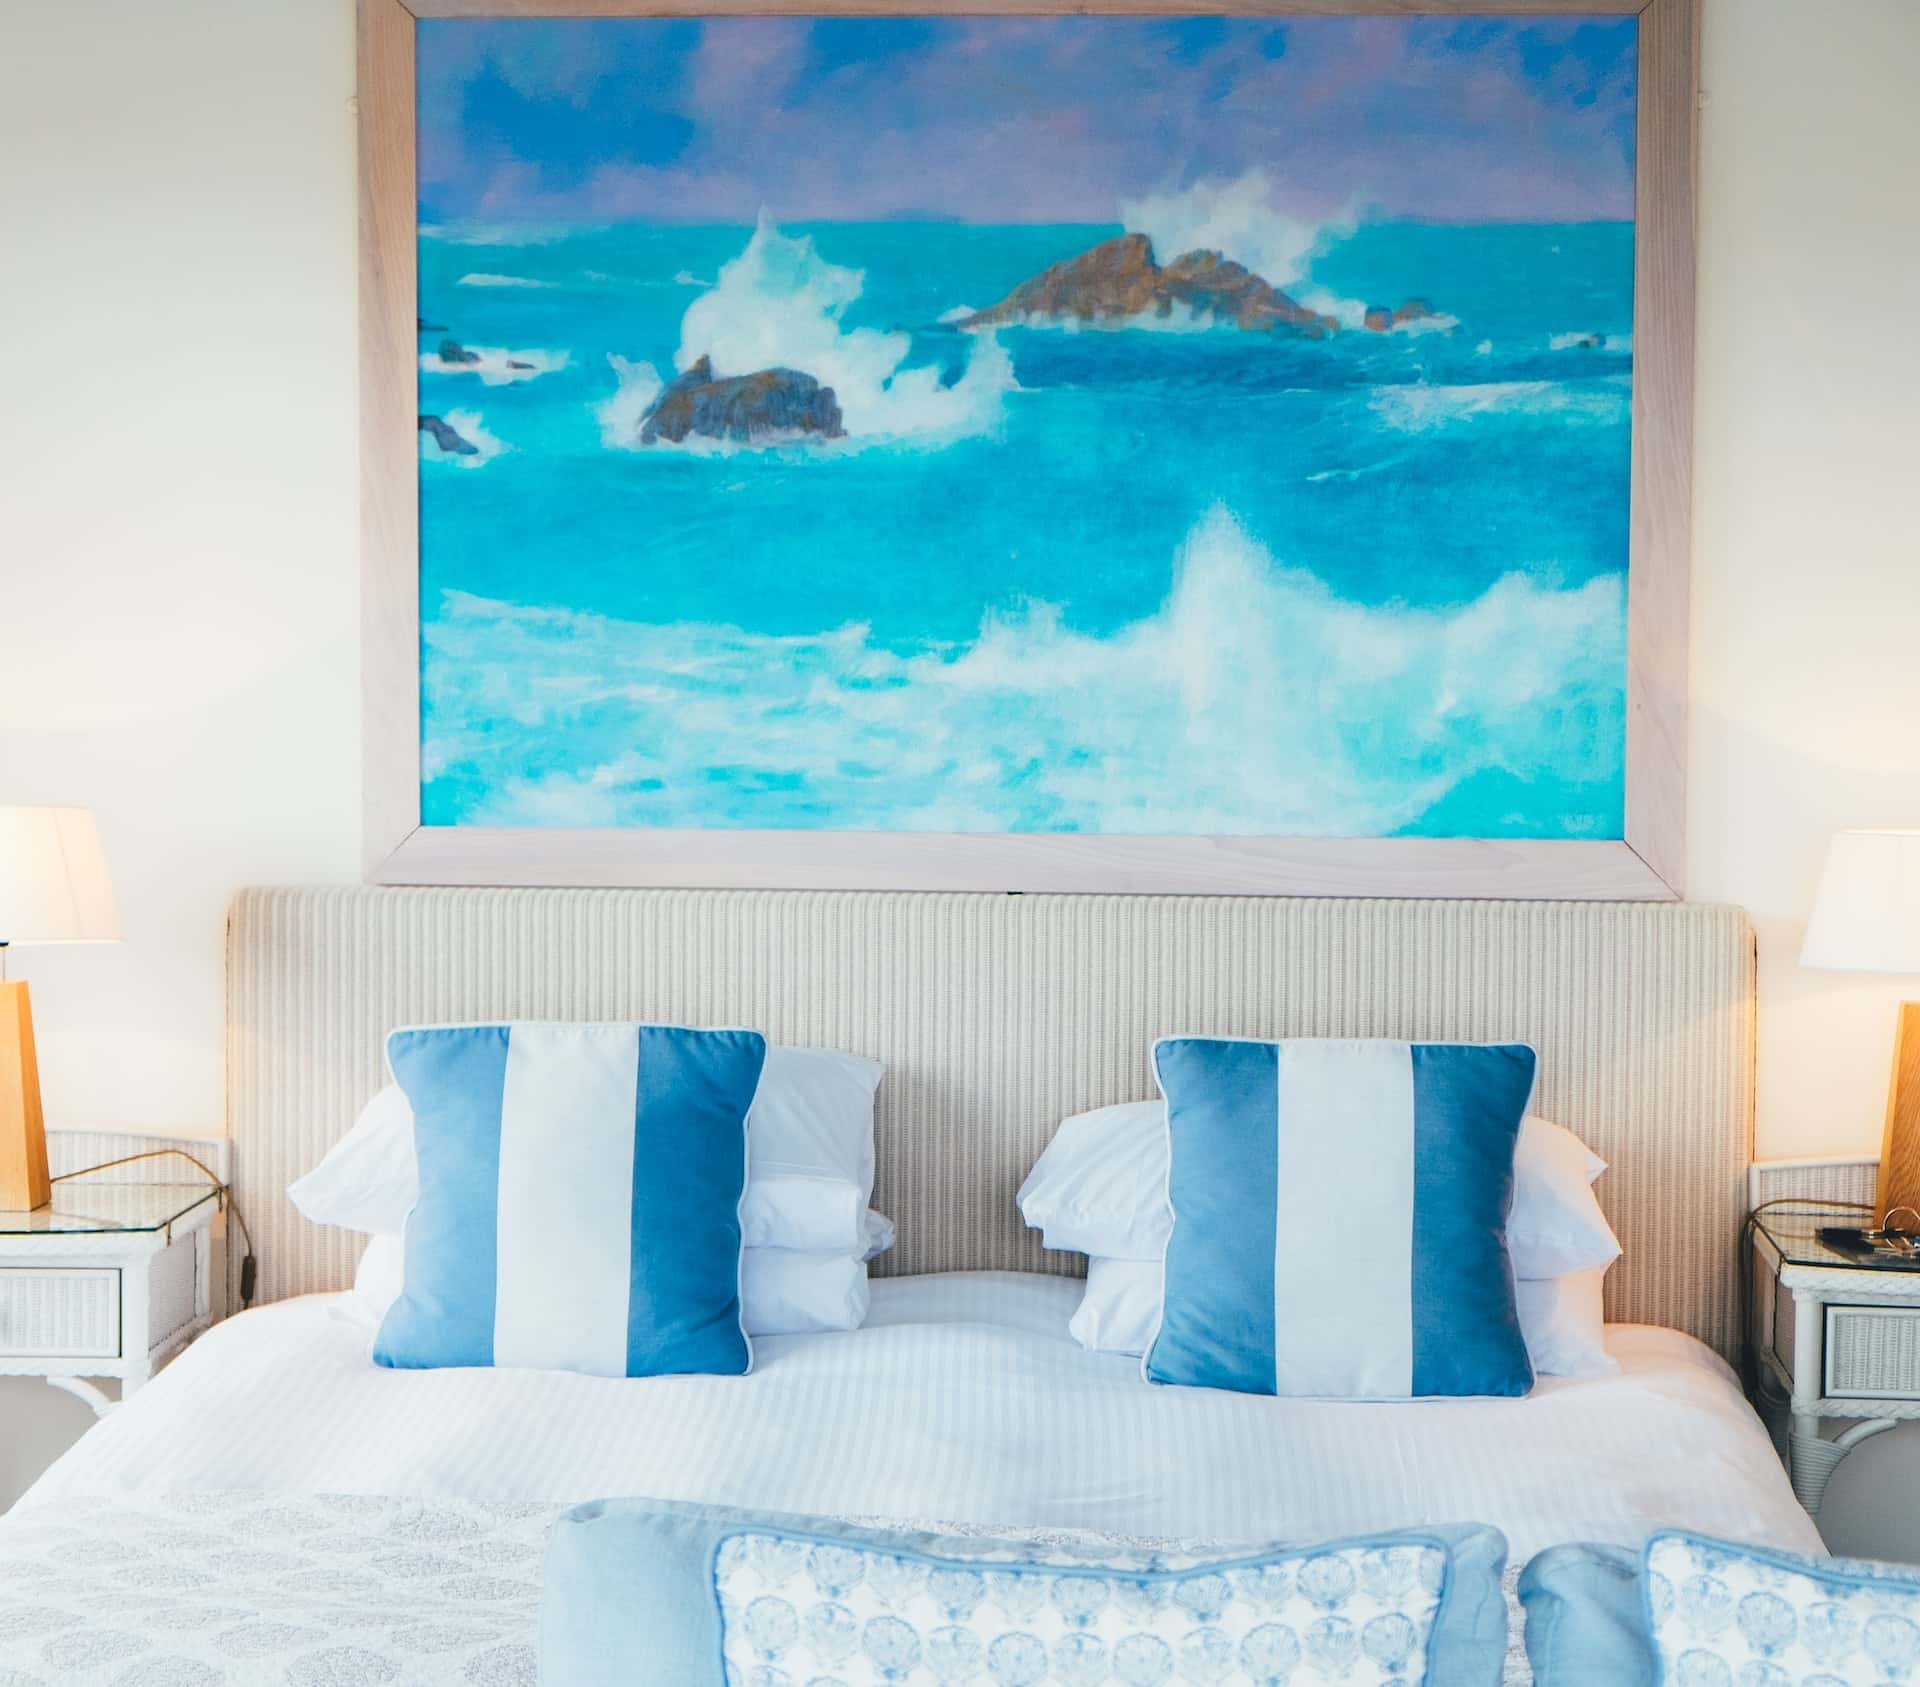 Colorful Beach Bedroom Decorating Ideas